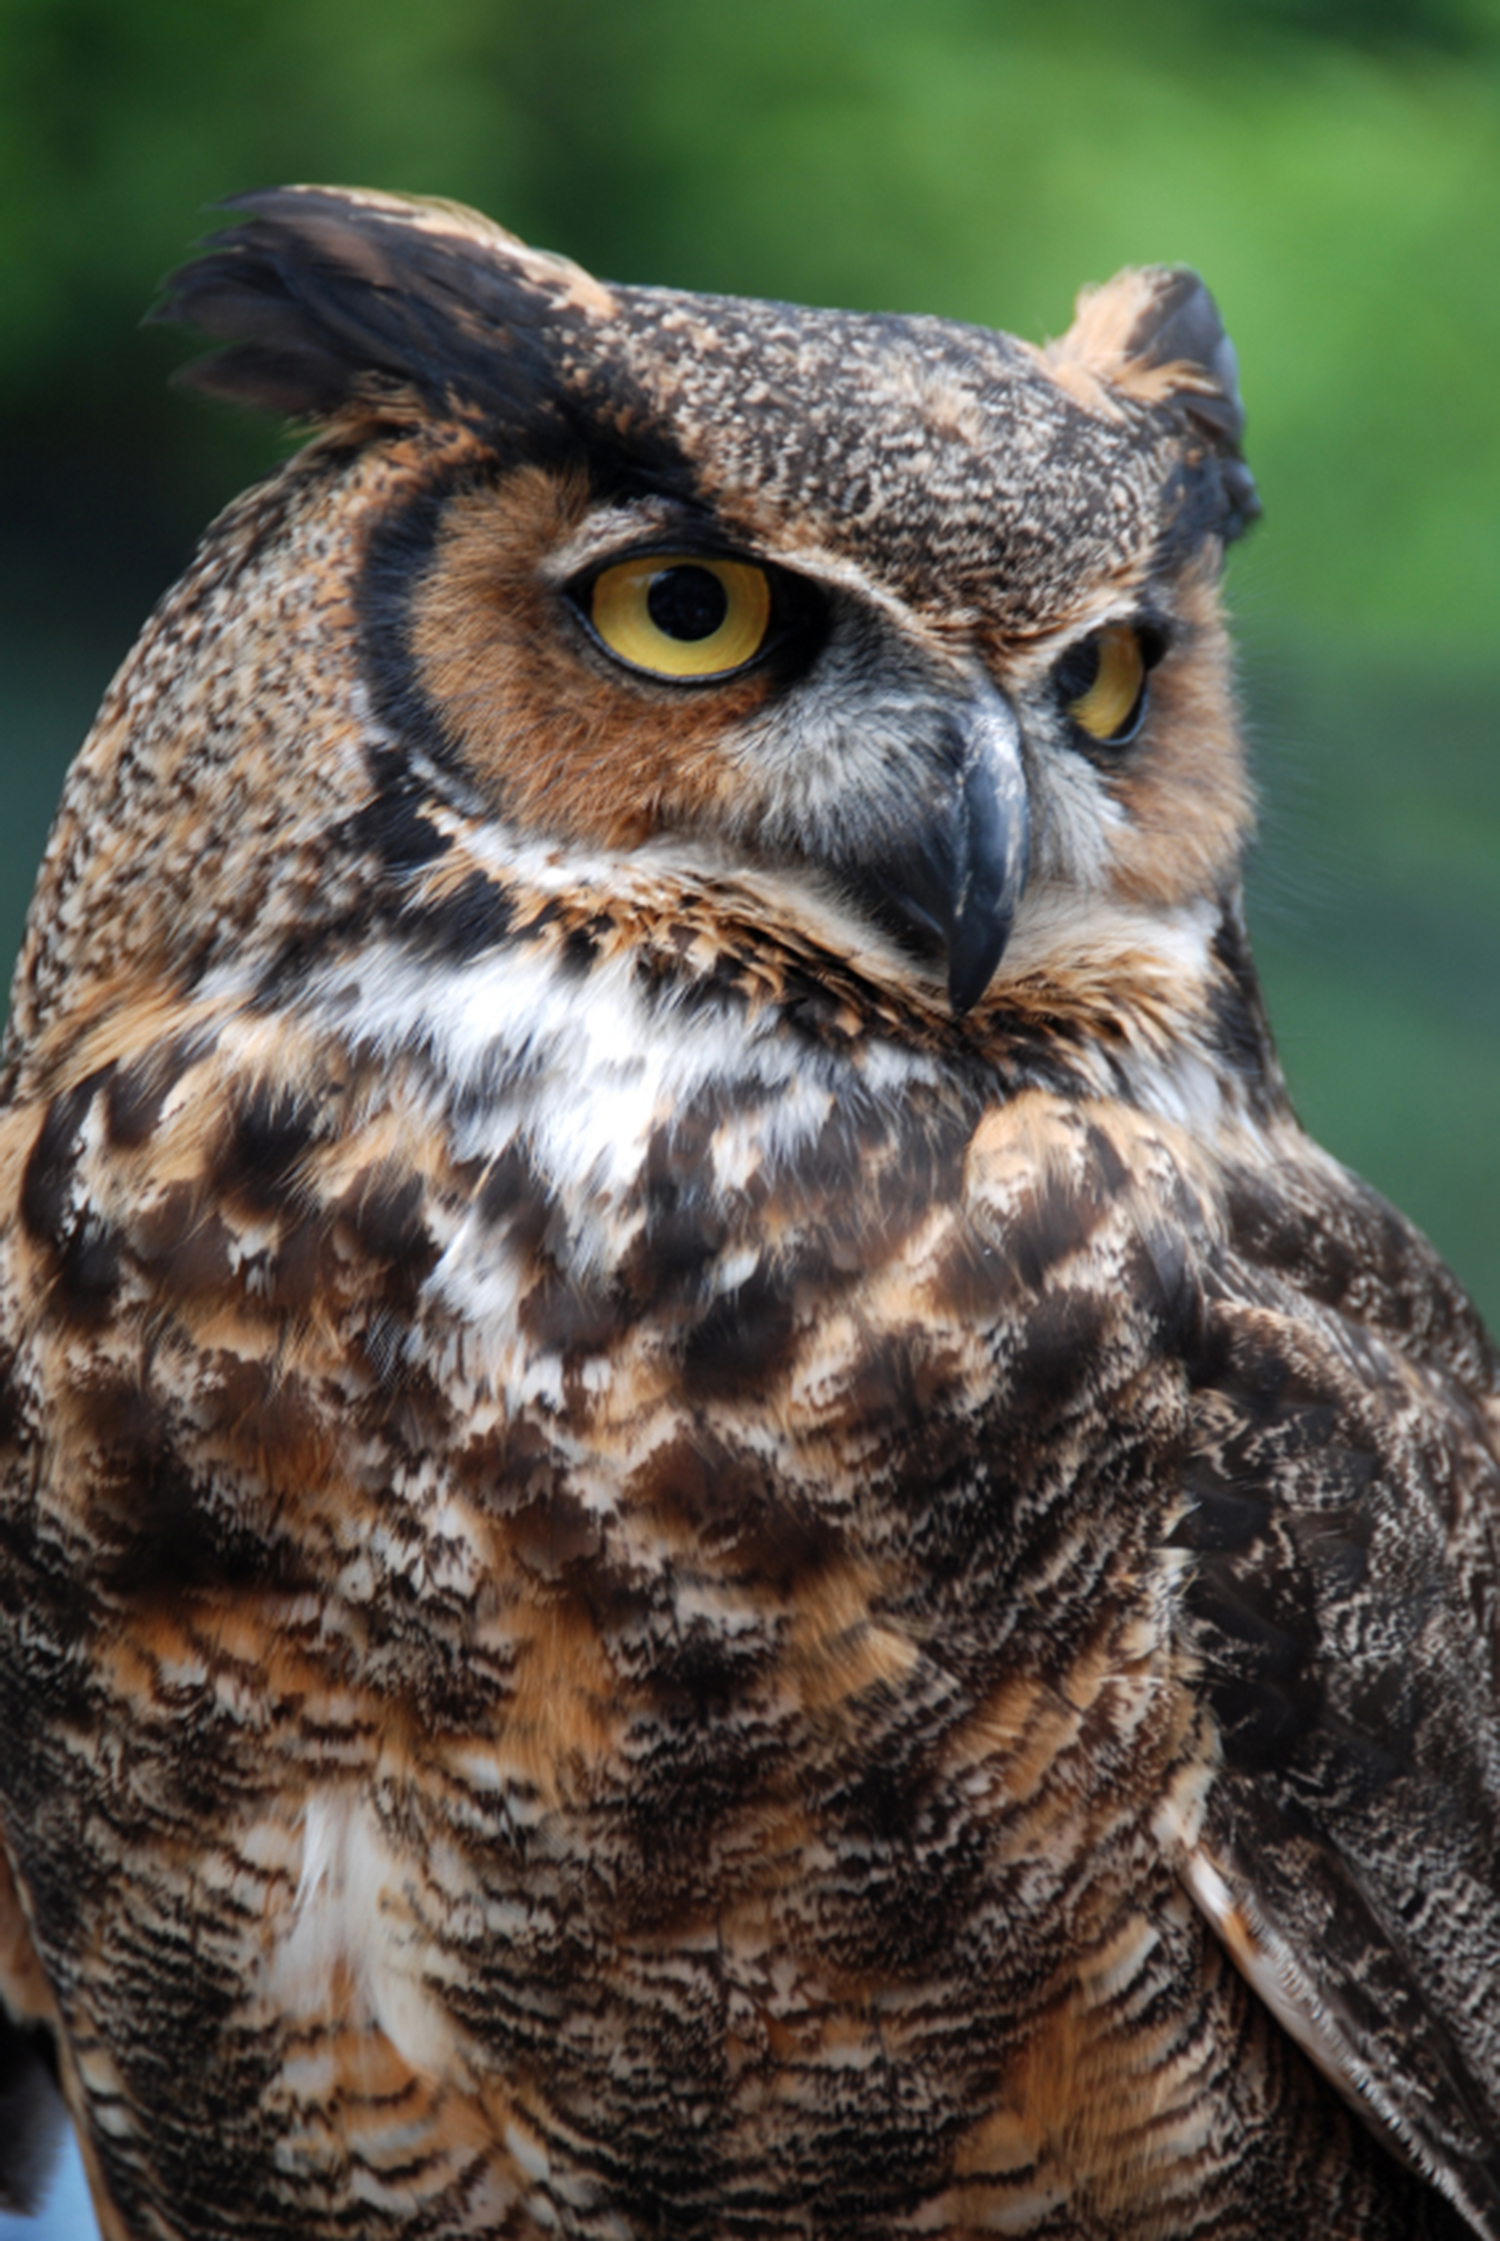 Owls bring mystery, plus rodent control | Mississippi State ...